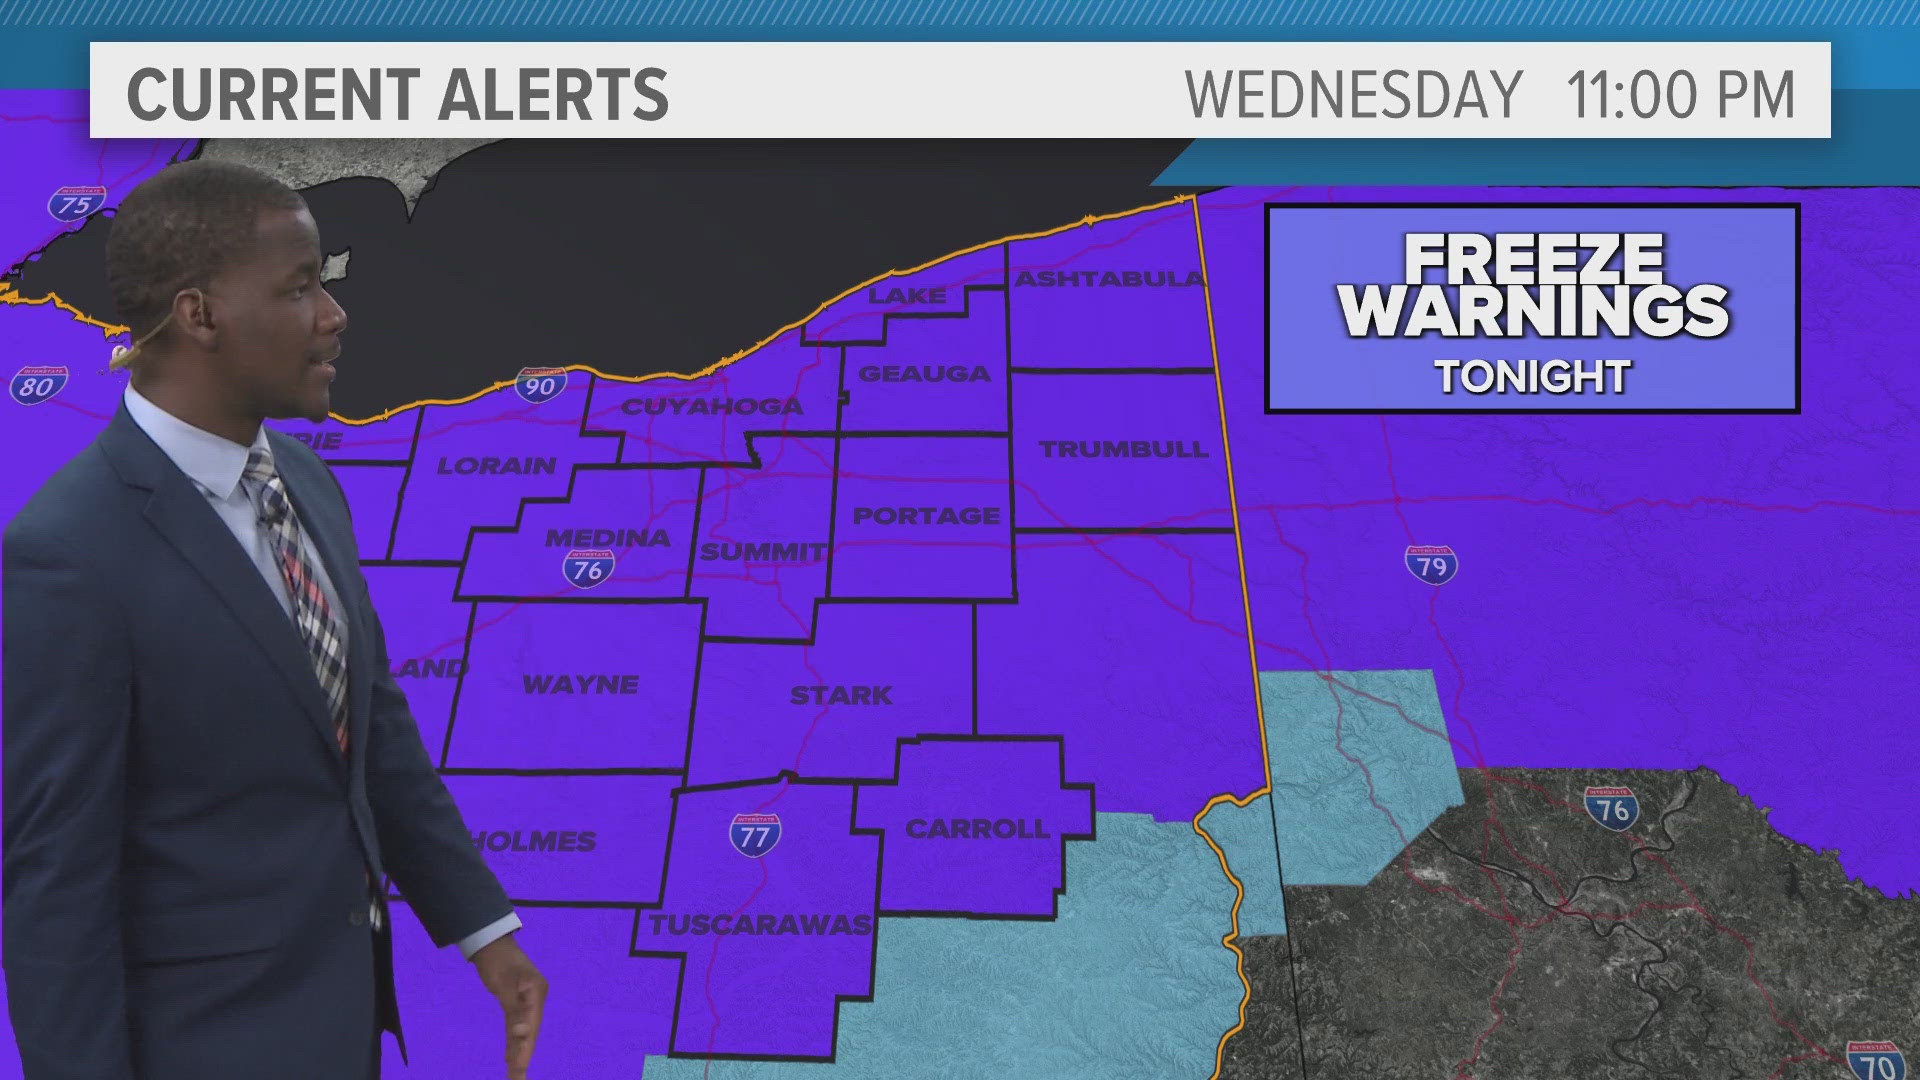 Freeze Warnings tonight, then temperatures surge this weekend.